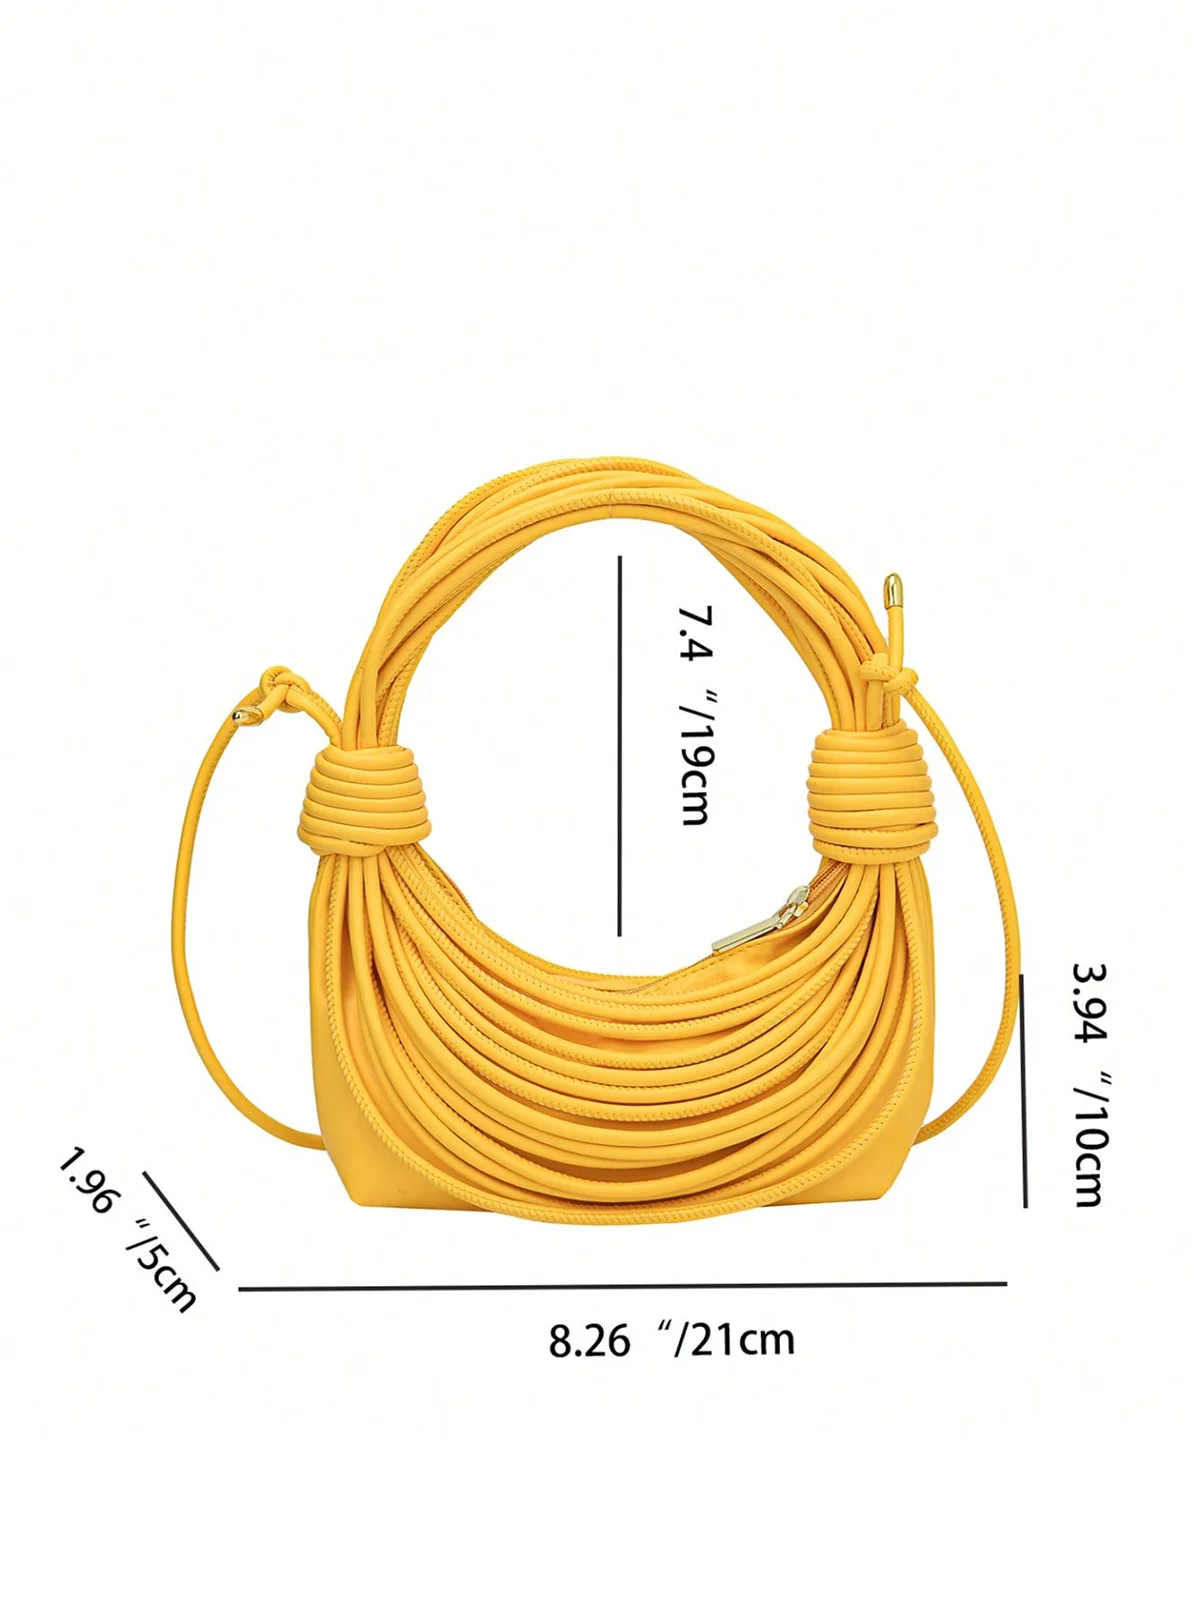 Fashionable Multi-Layered Rope Knot Shoulder Bag with Crossbody Strap